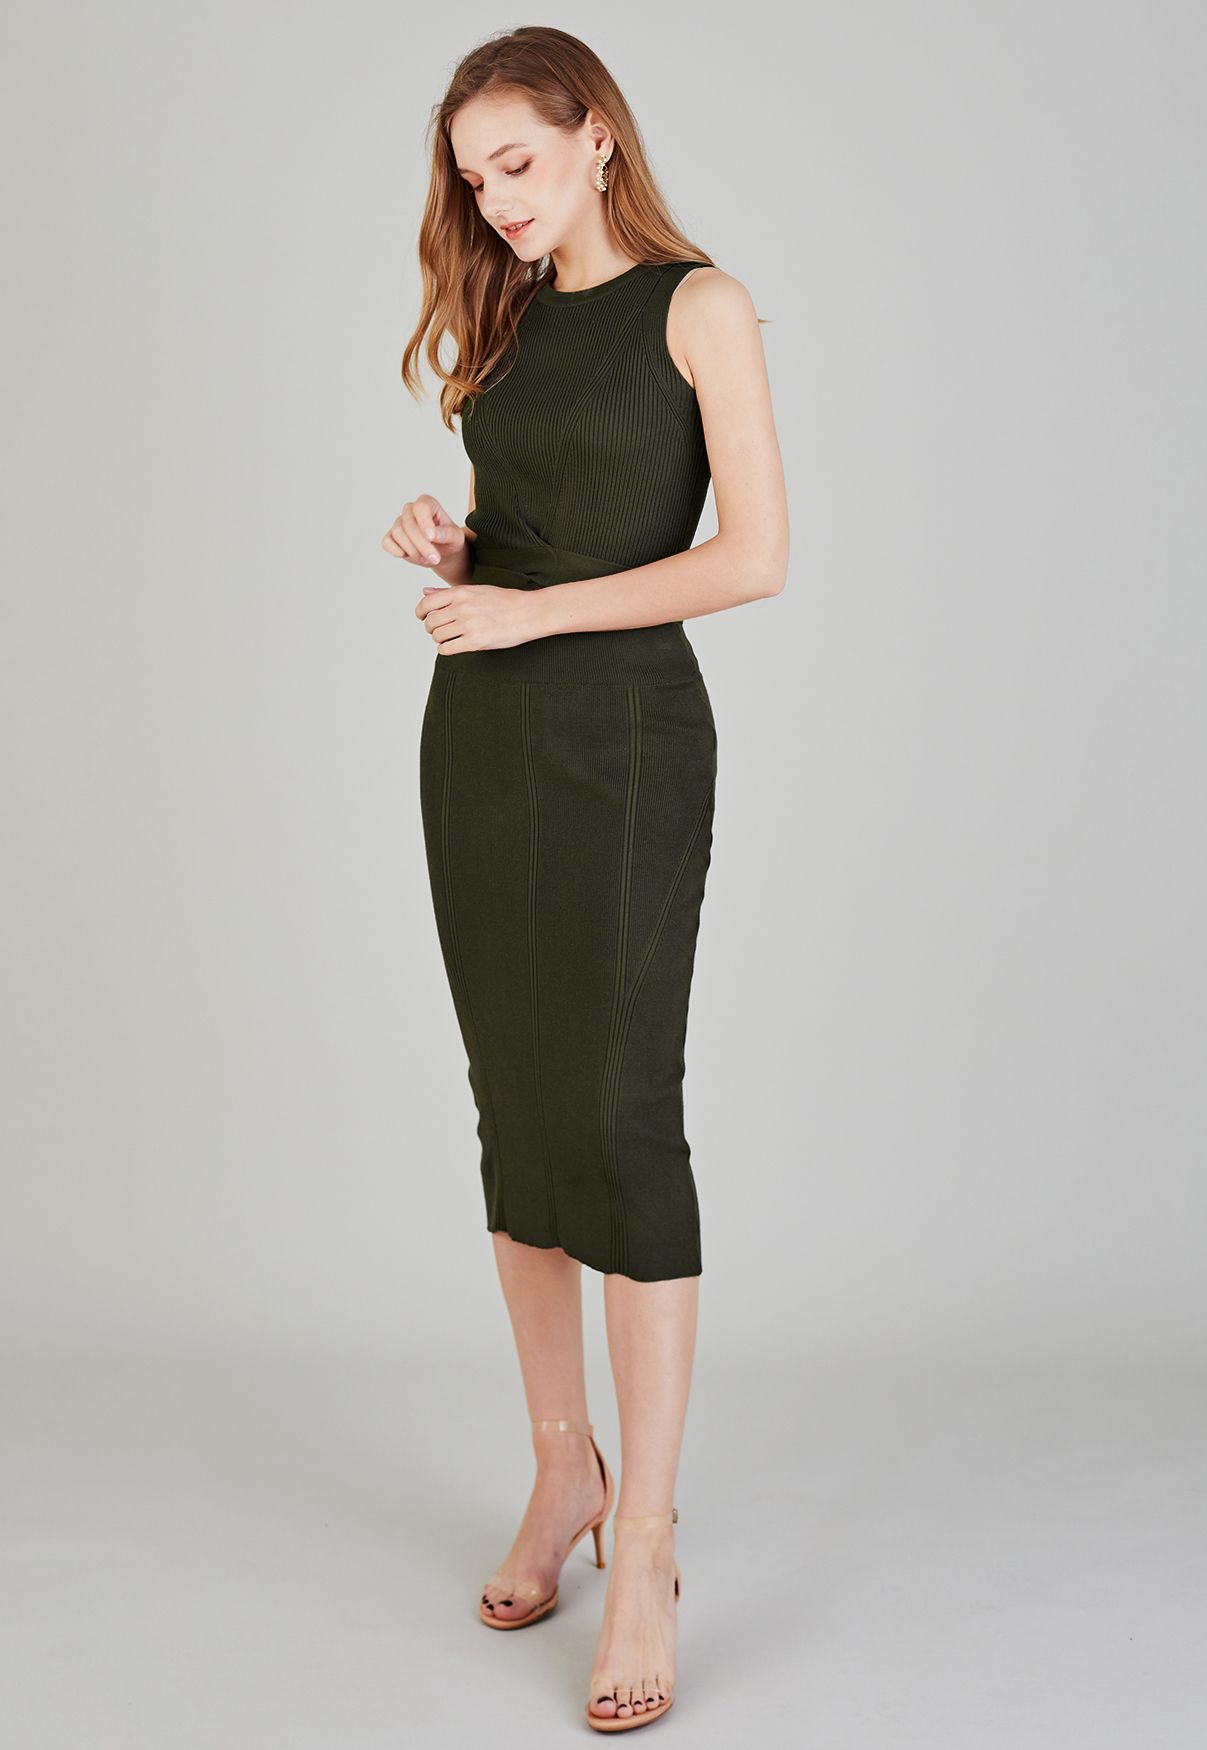 Tie Waist Knit Top and Pencil Skirt Set in Moss Green